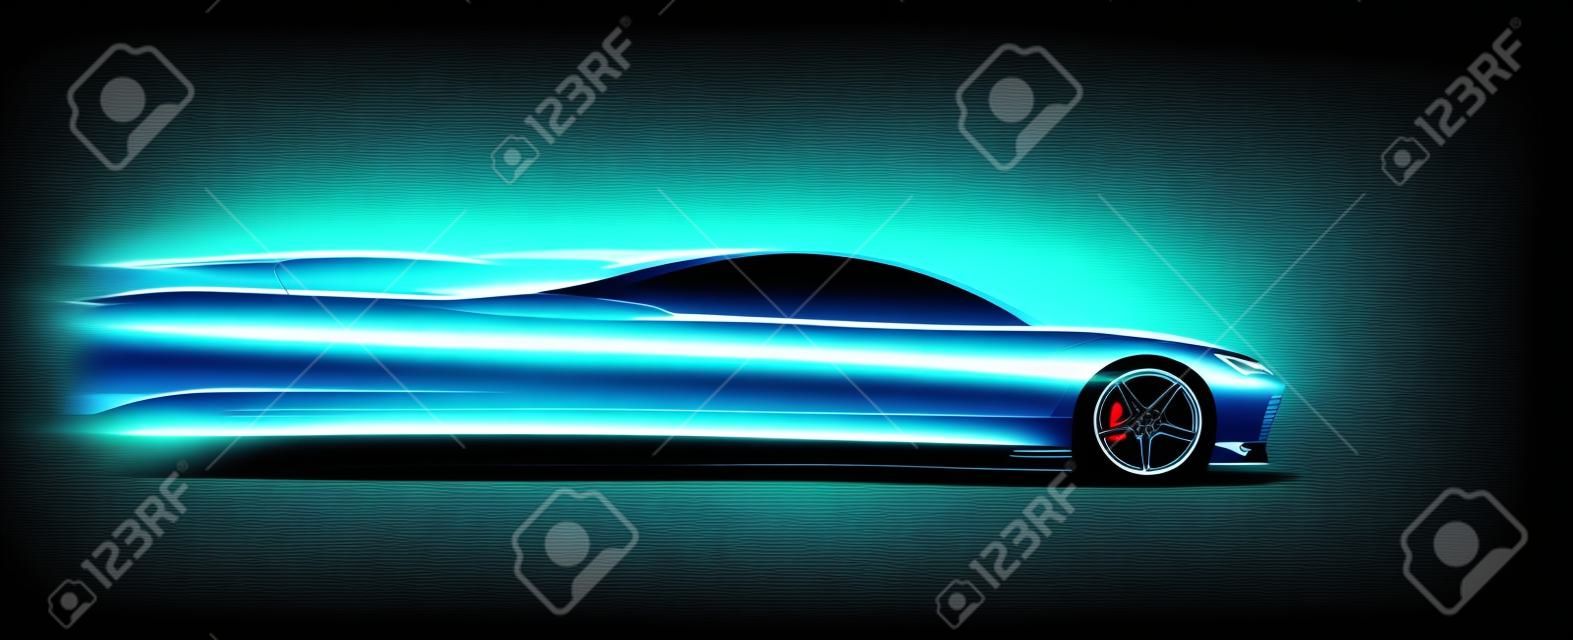 Side view neon glowing sport car silhouette. Abstract modern styled vector eps 10 illustration.